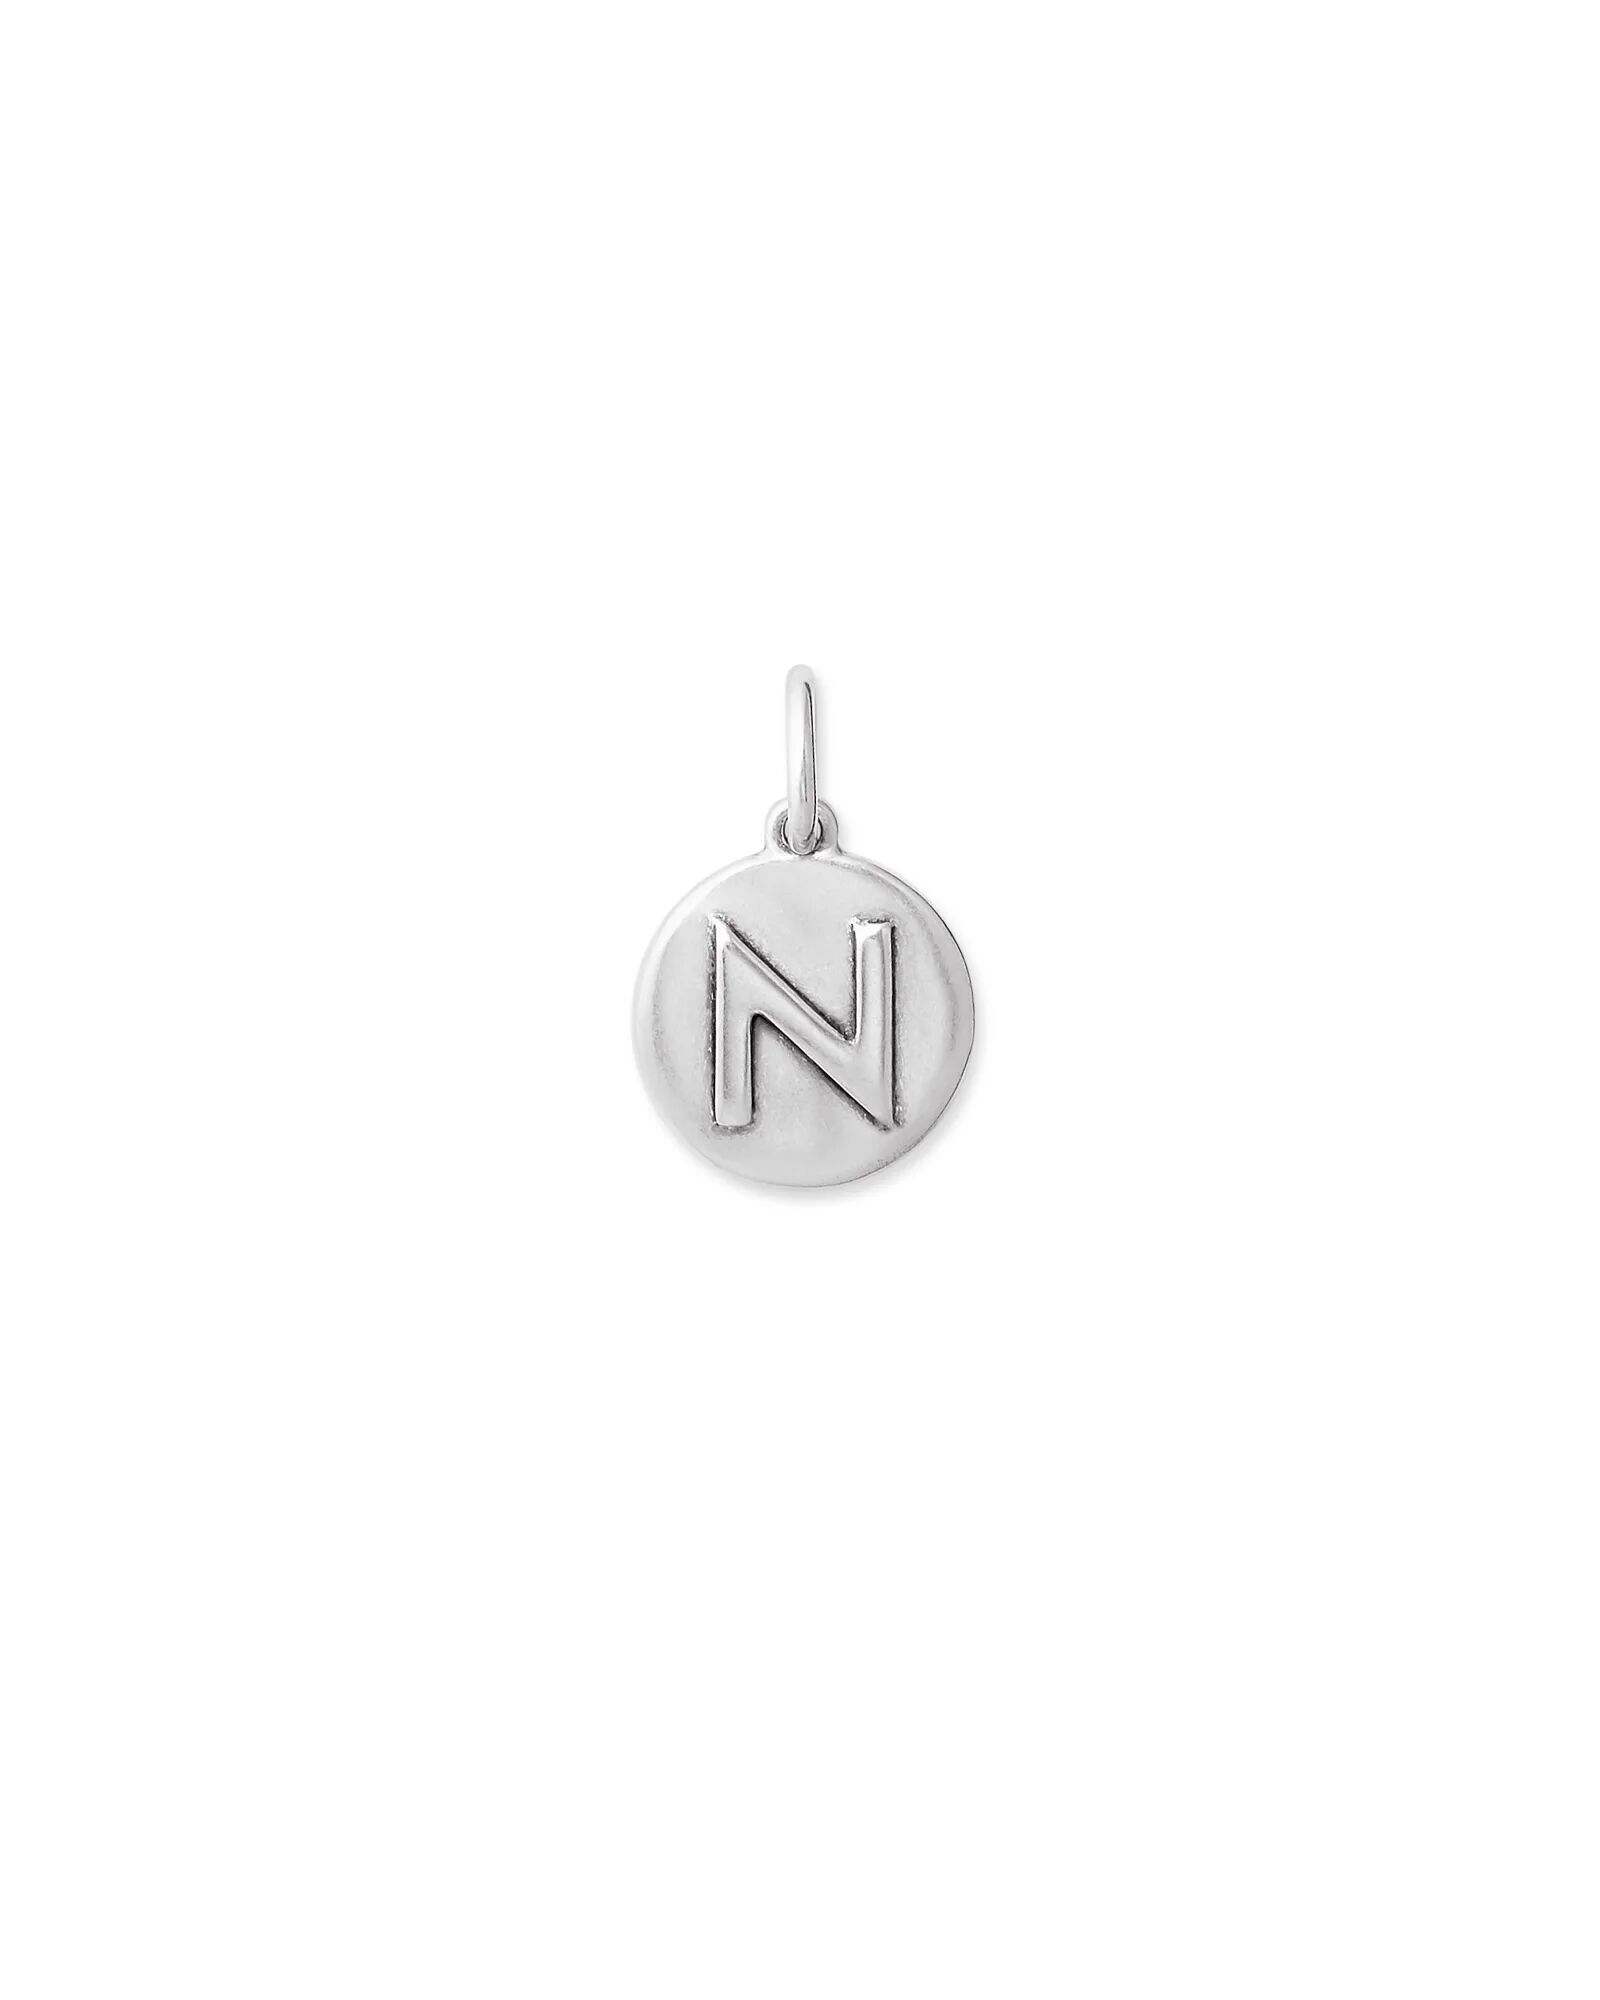 Kendra Scott Letter N Coin Charm in Oxidized Sterling Silver   Metal